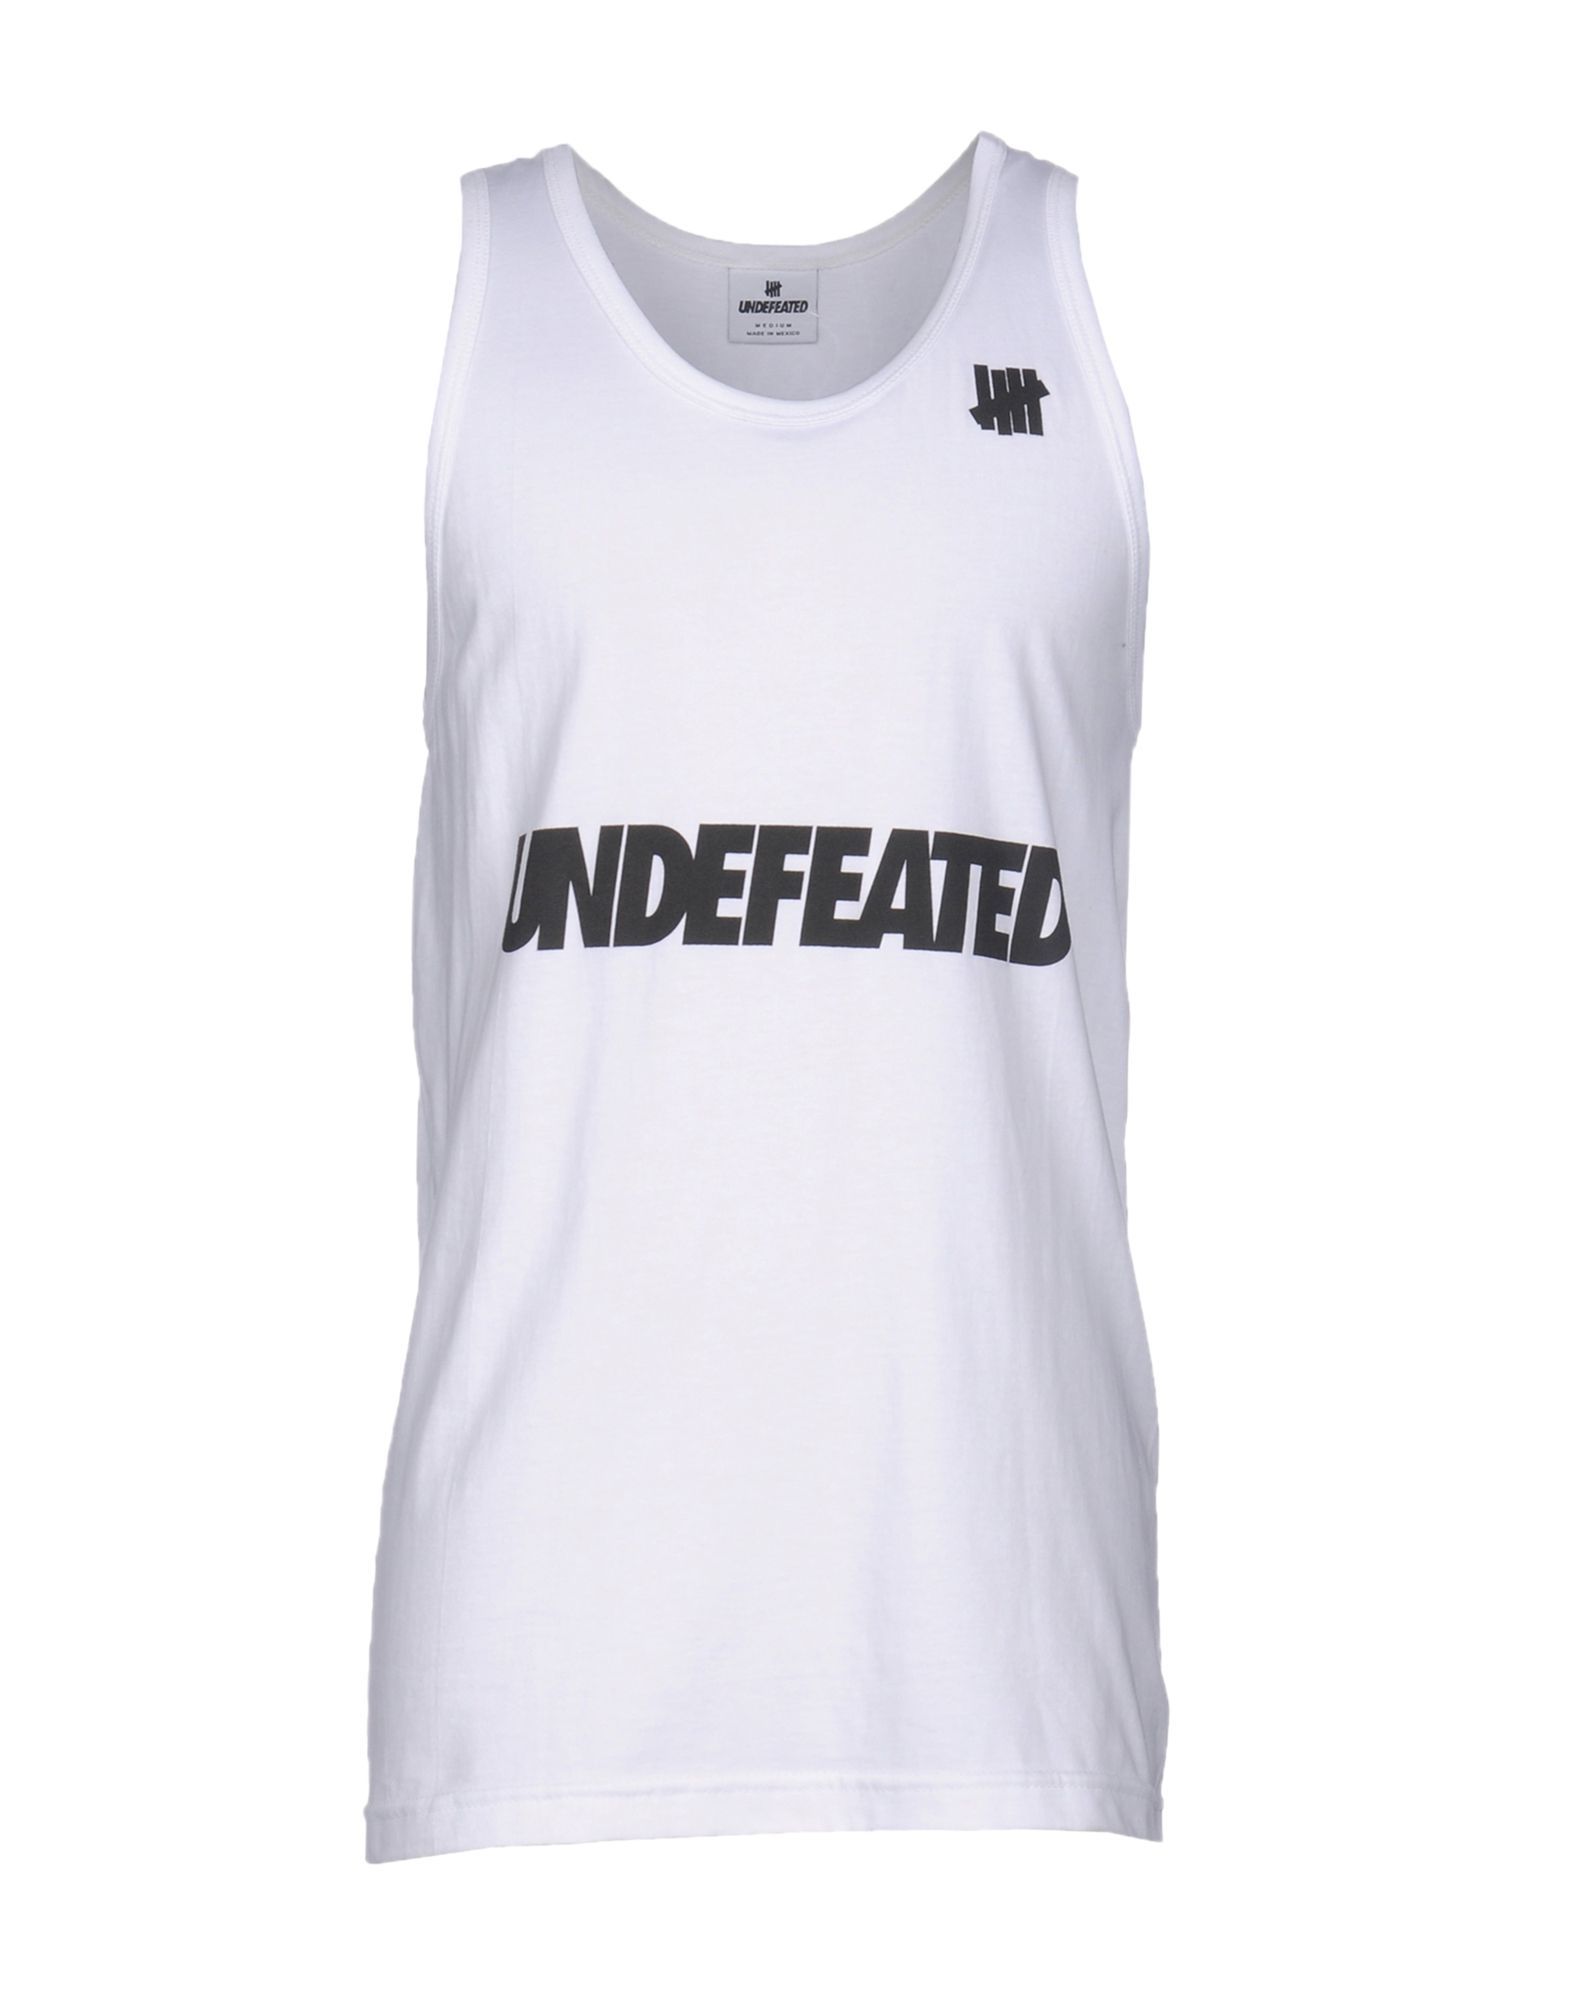 UNDEFEATED Tank tops | YOOX (US)